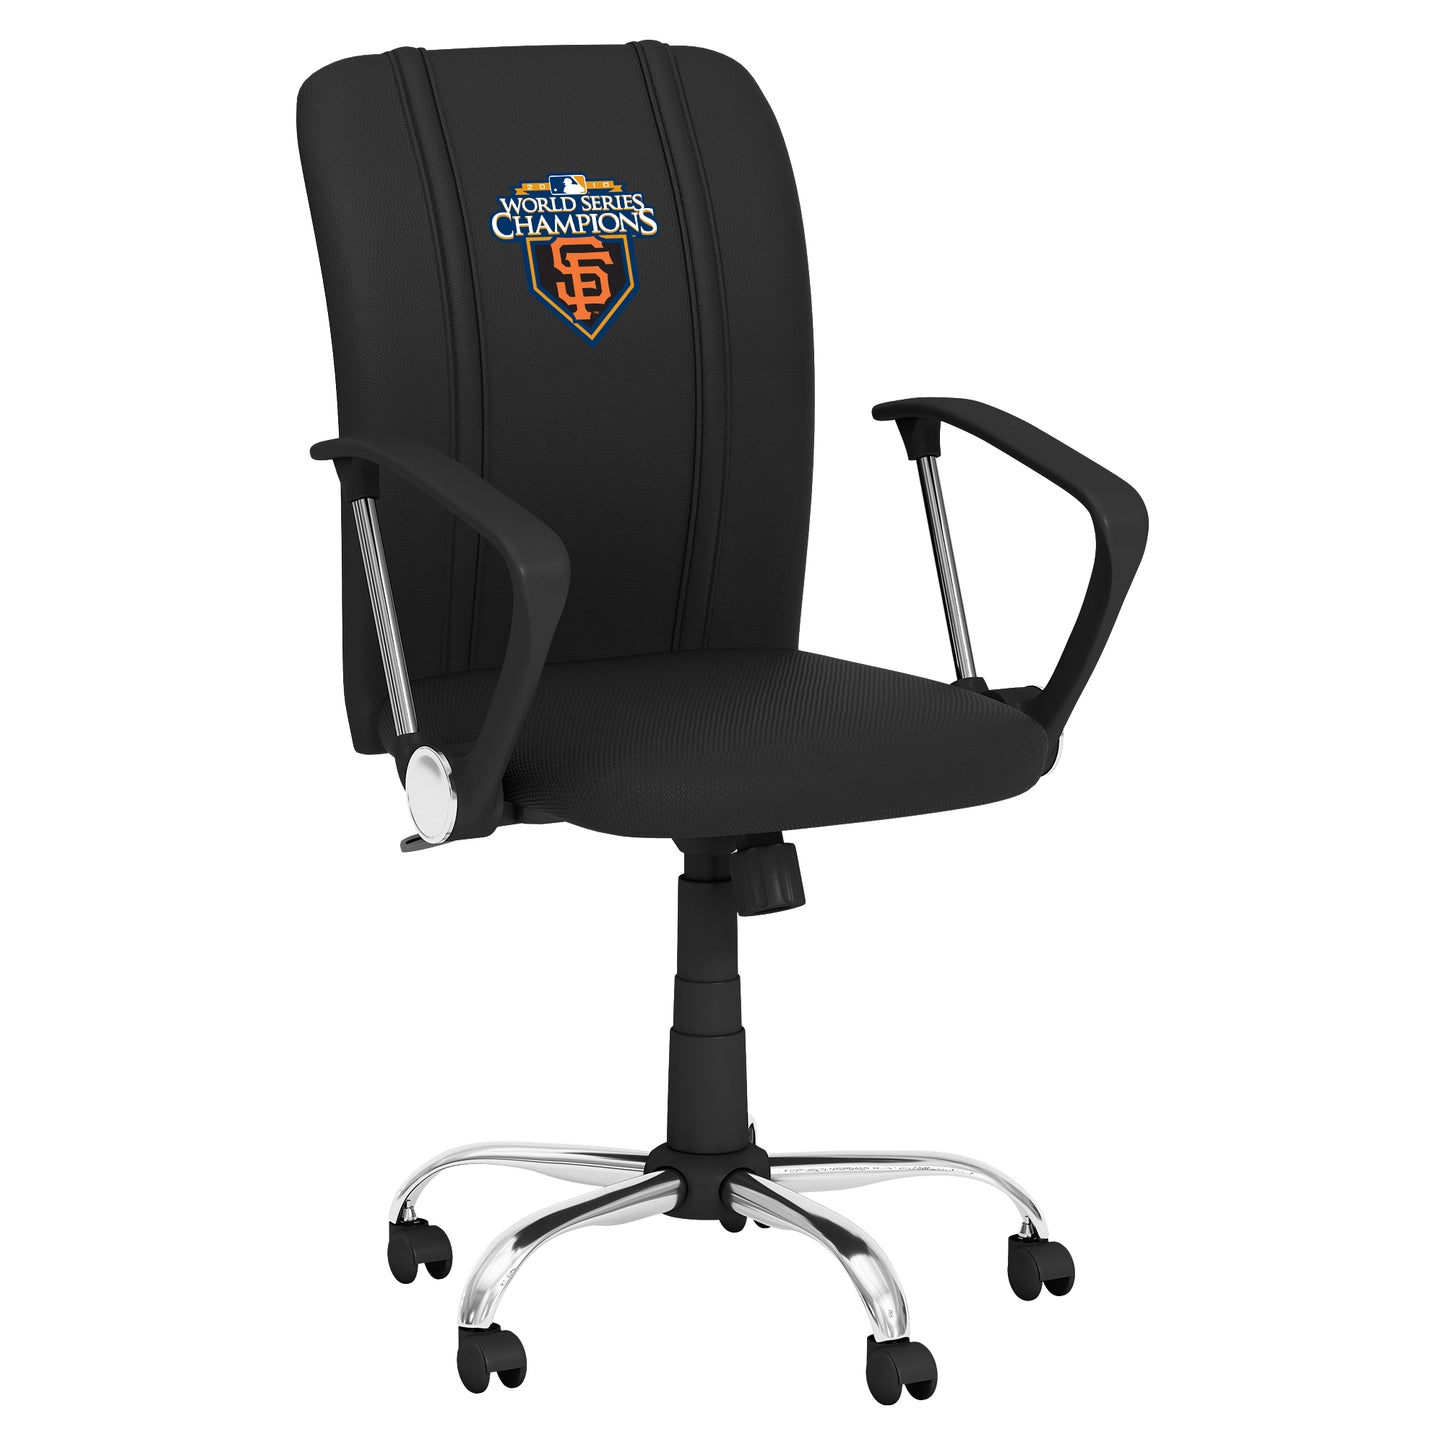 Curve Task Chair with San Francisco Giants Champs'10